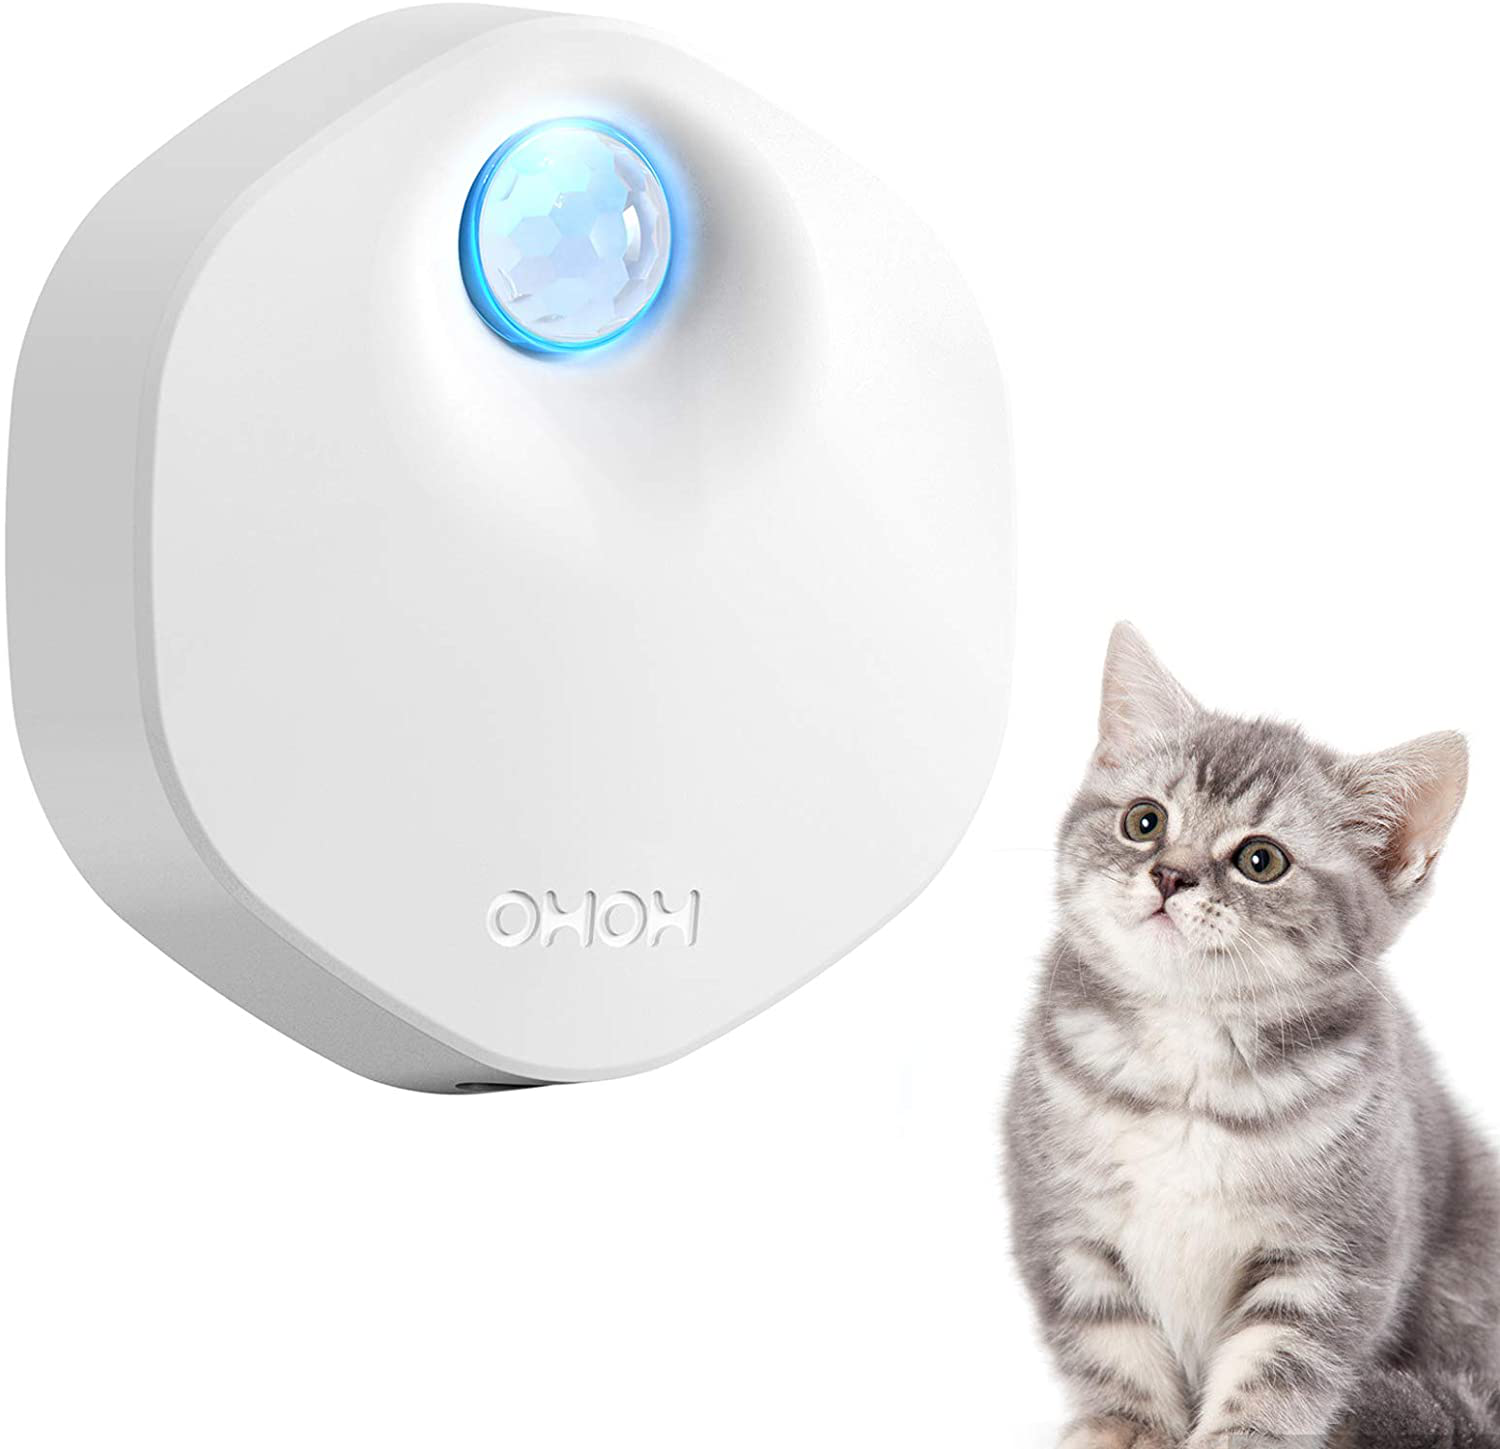 Electronic Cat Litter Deodorizer, Intelligent Sensor Deodorization 99.9% Dust-Free 7-Day Battery Life Remover for All Kinds of Cat Litter Box Restroom Wardrobe Kitchen Car and Small Area (Single Head)